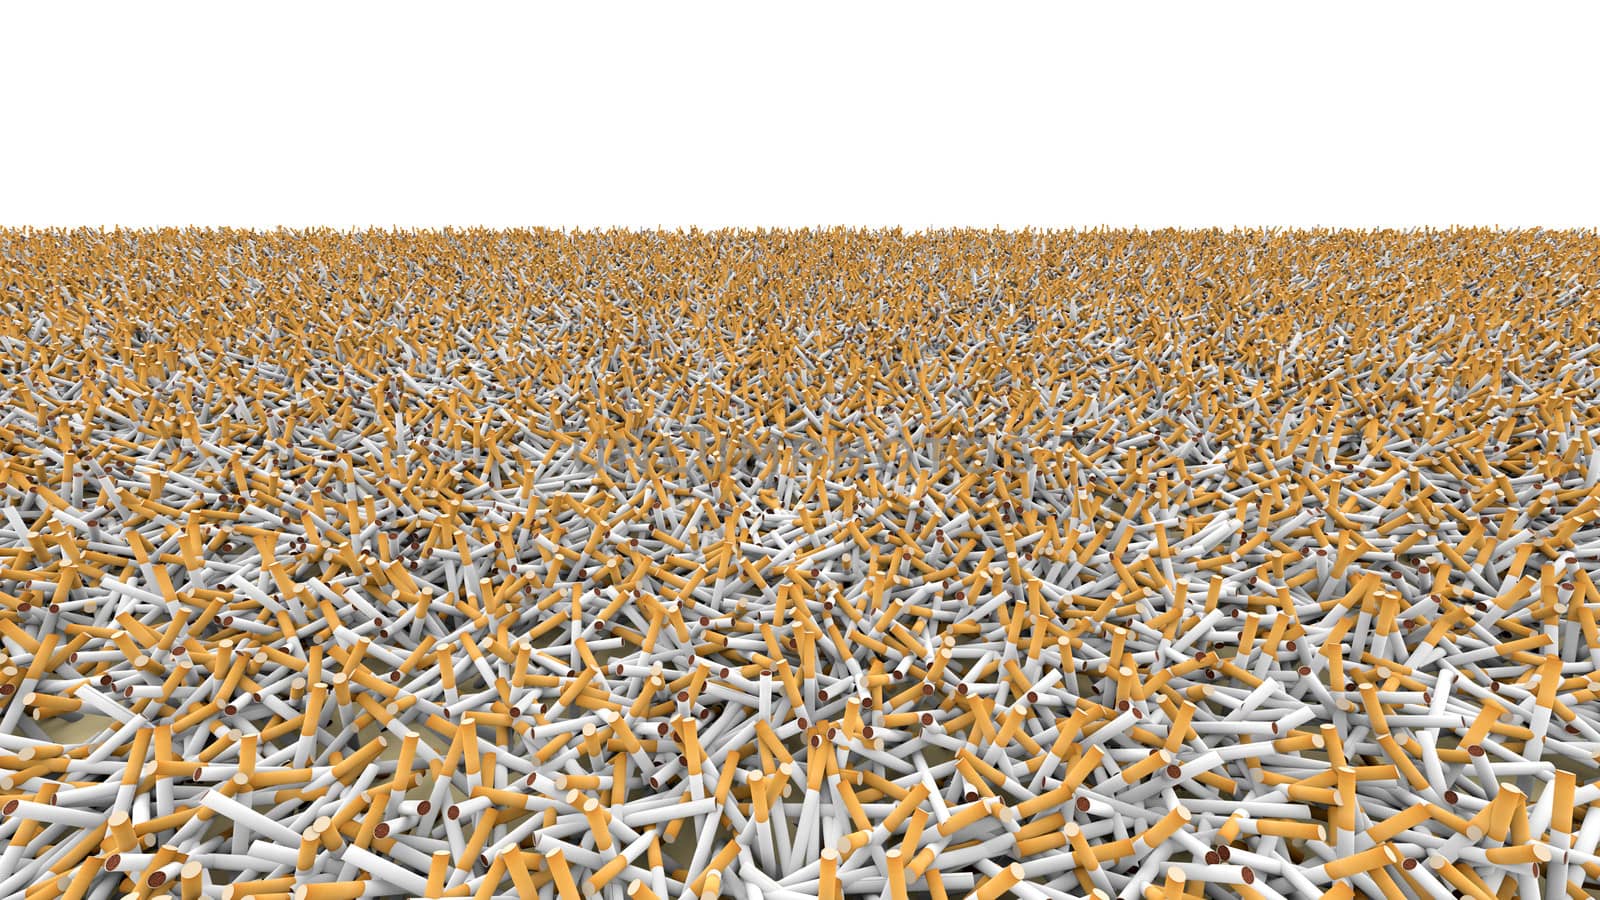 field completely covered with thousands of cigarettes